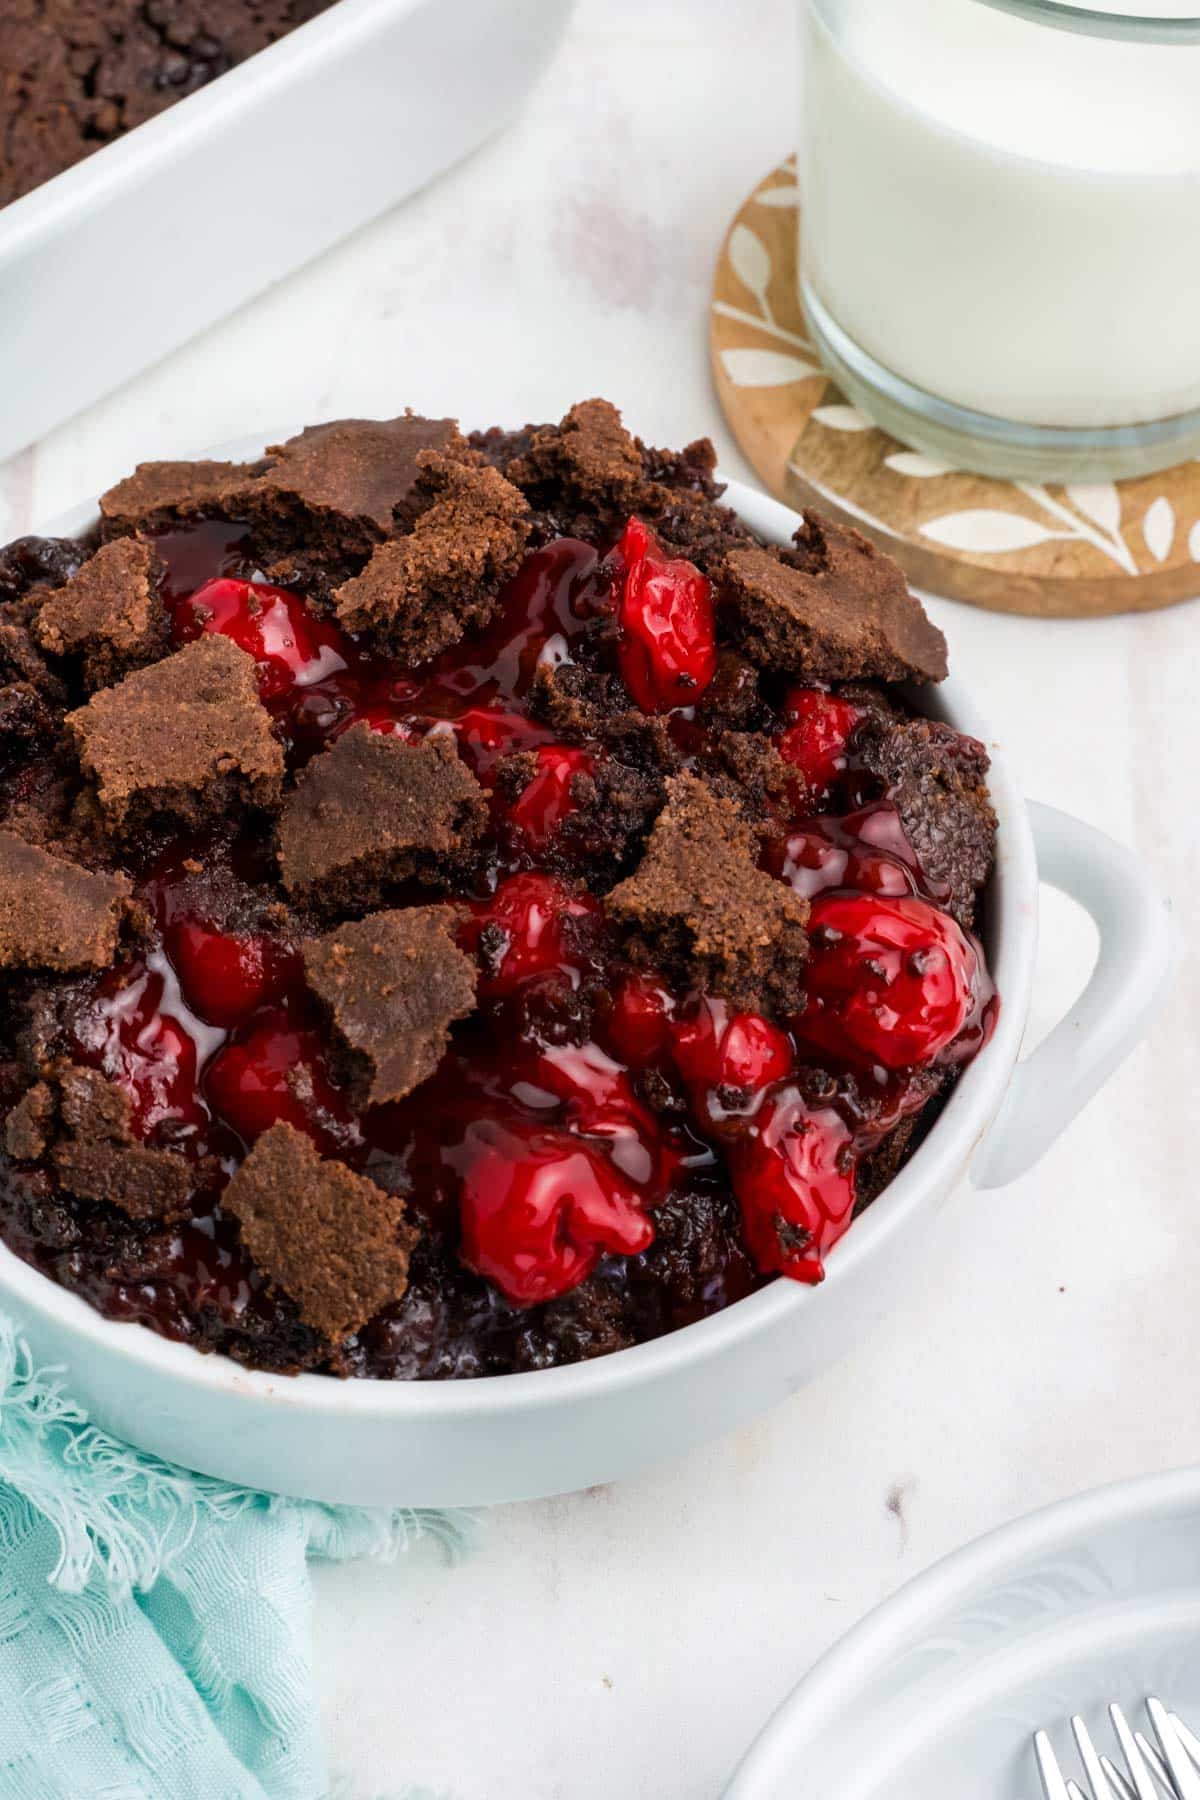 Chocolate cherry dump cake served up in a white bowl on the table.